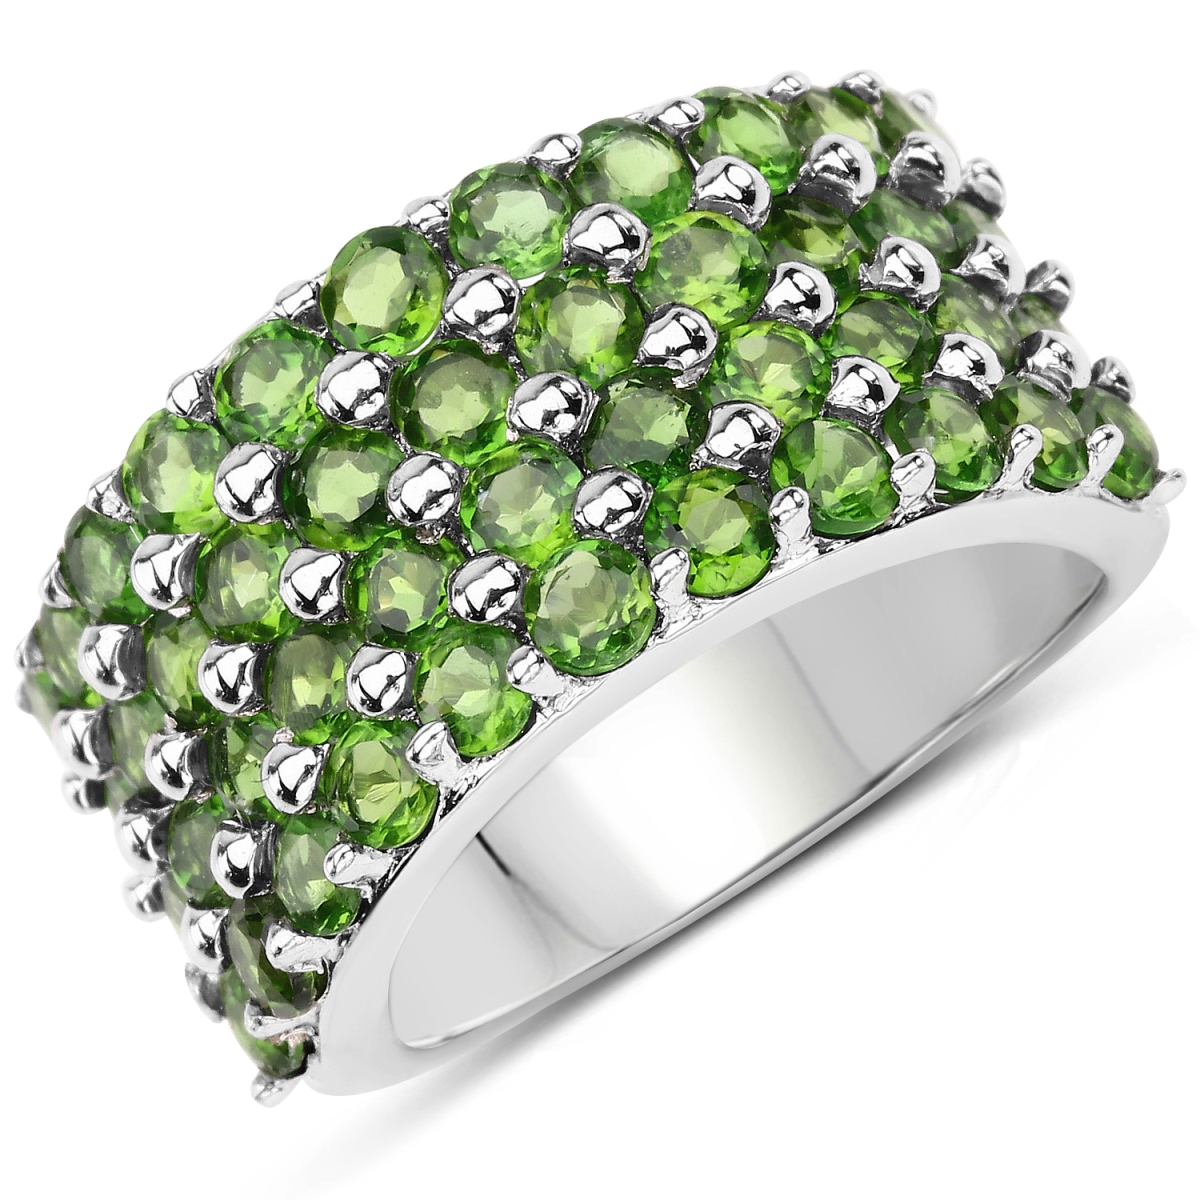 Picture of Malaika QR4962CD-SSR-6 3.08 Carat Genuine Chrome Diopside 0.925 Sterling Silver Ring